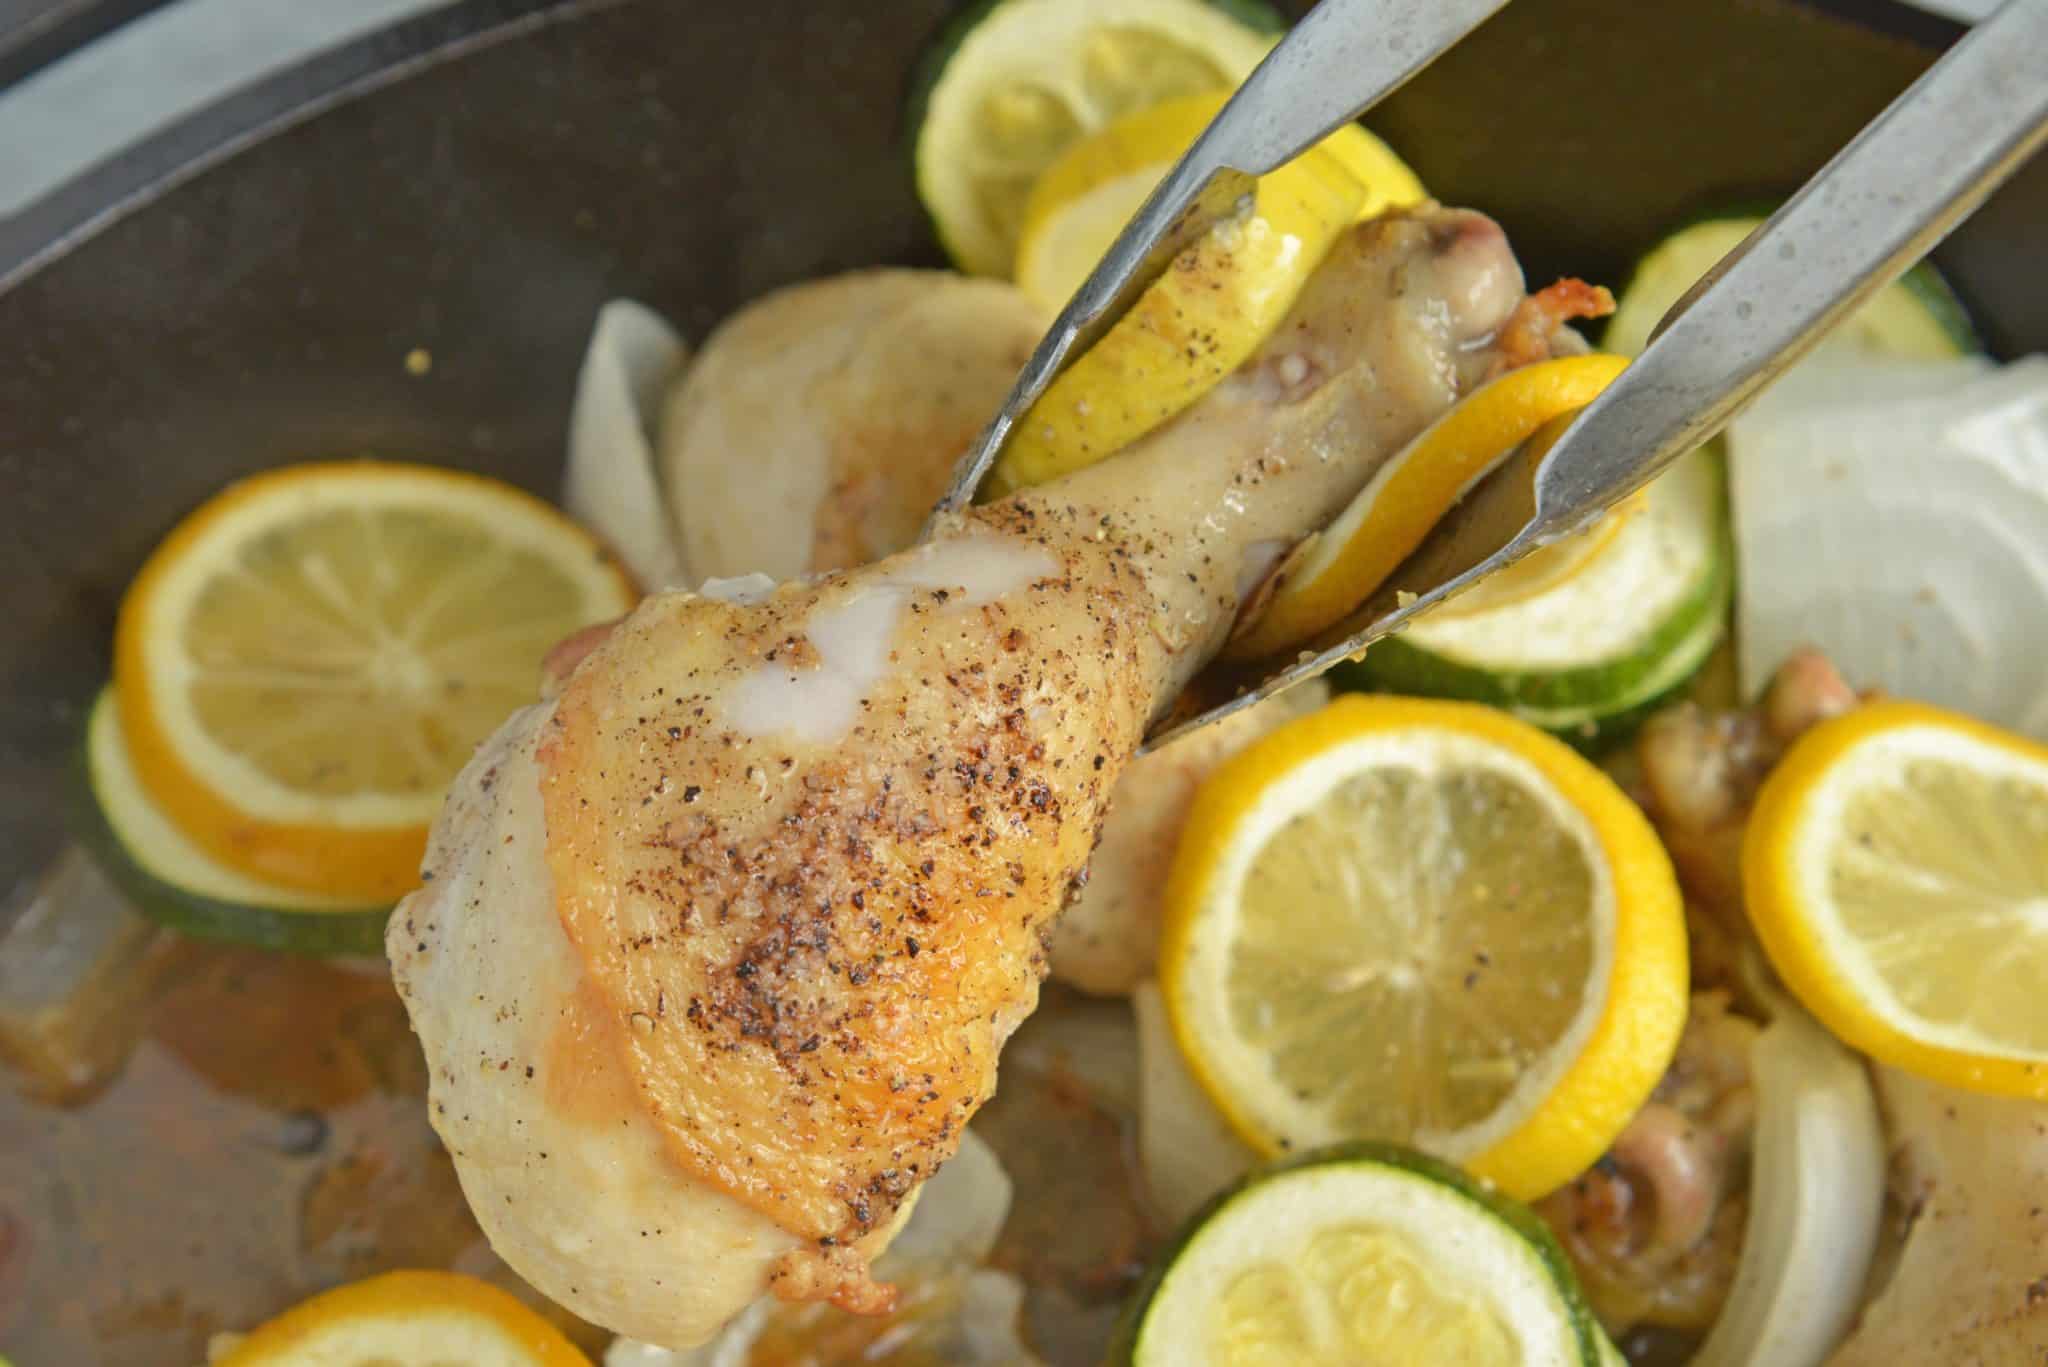 Lemon Chicken with Zucchini is a meal with classic, all-American flavors. Cast iron recipes are great since everything gets cooked in the same pan! #lemonchickenrecipe #castironrecipes www.savoryexperiments.com